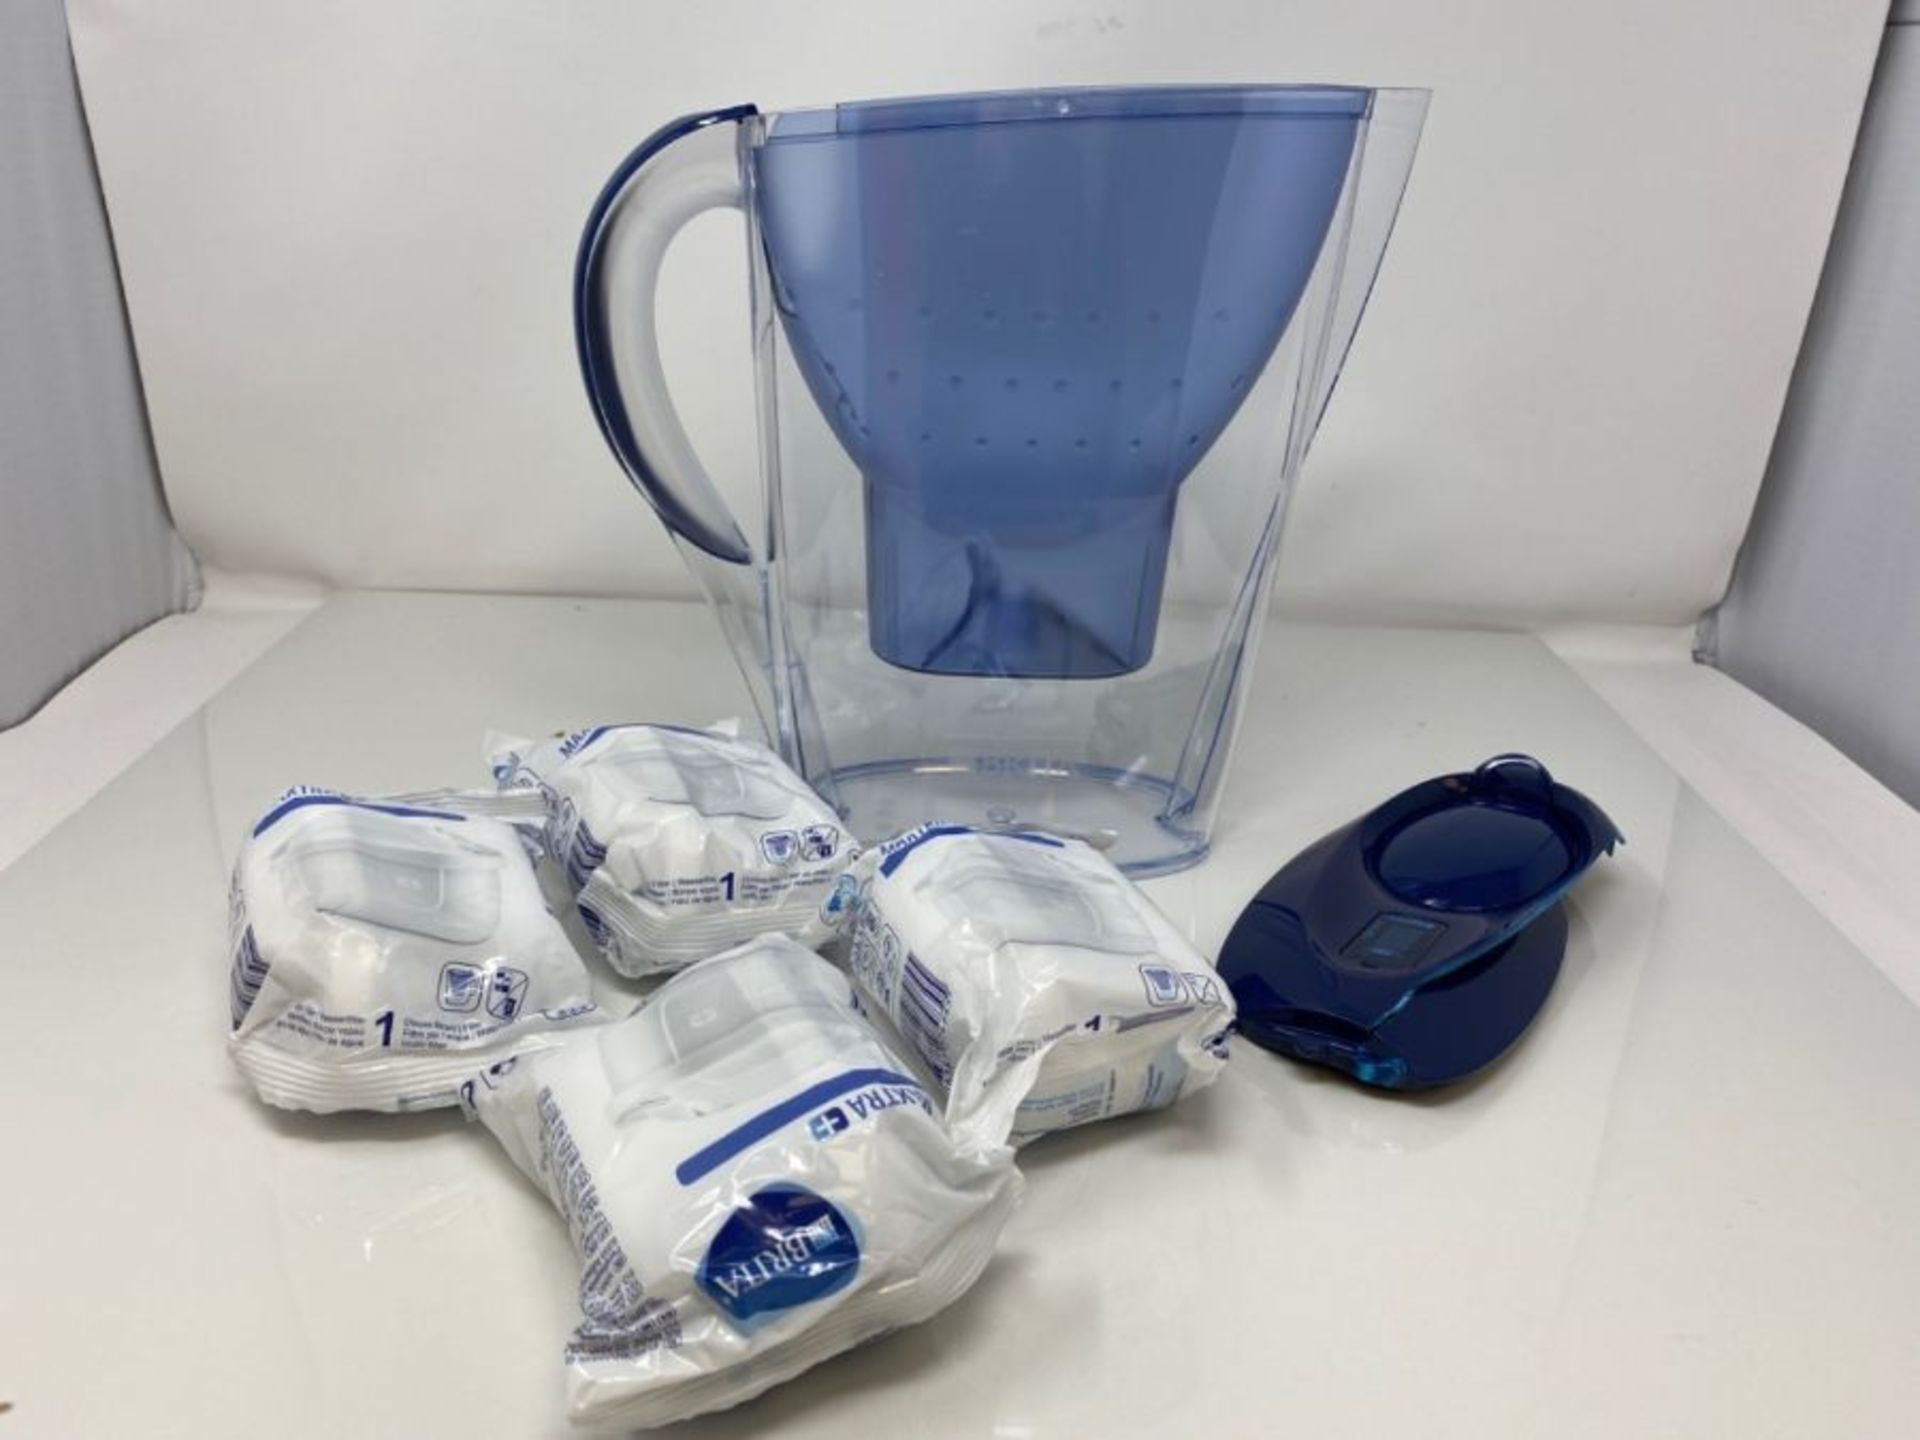 [CRACKED] BRITA Marella fridge water filter jug for reduction of chlorine, limescale a - Image 2 of 2